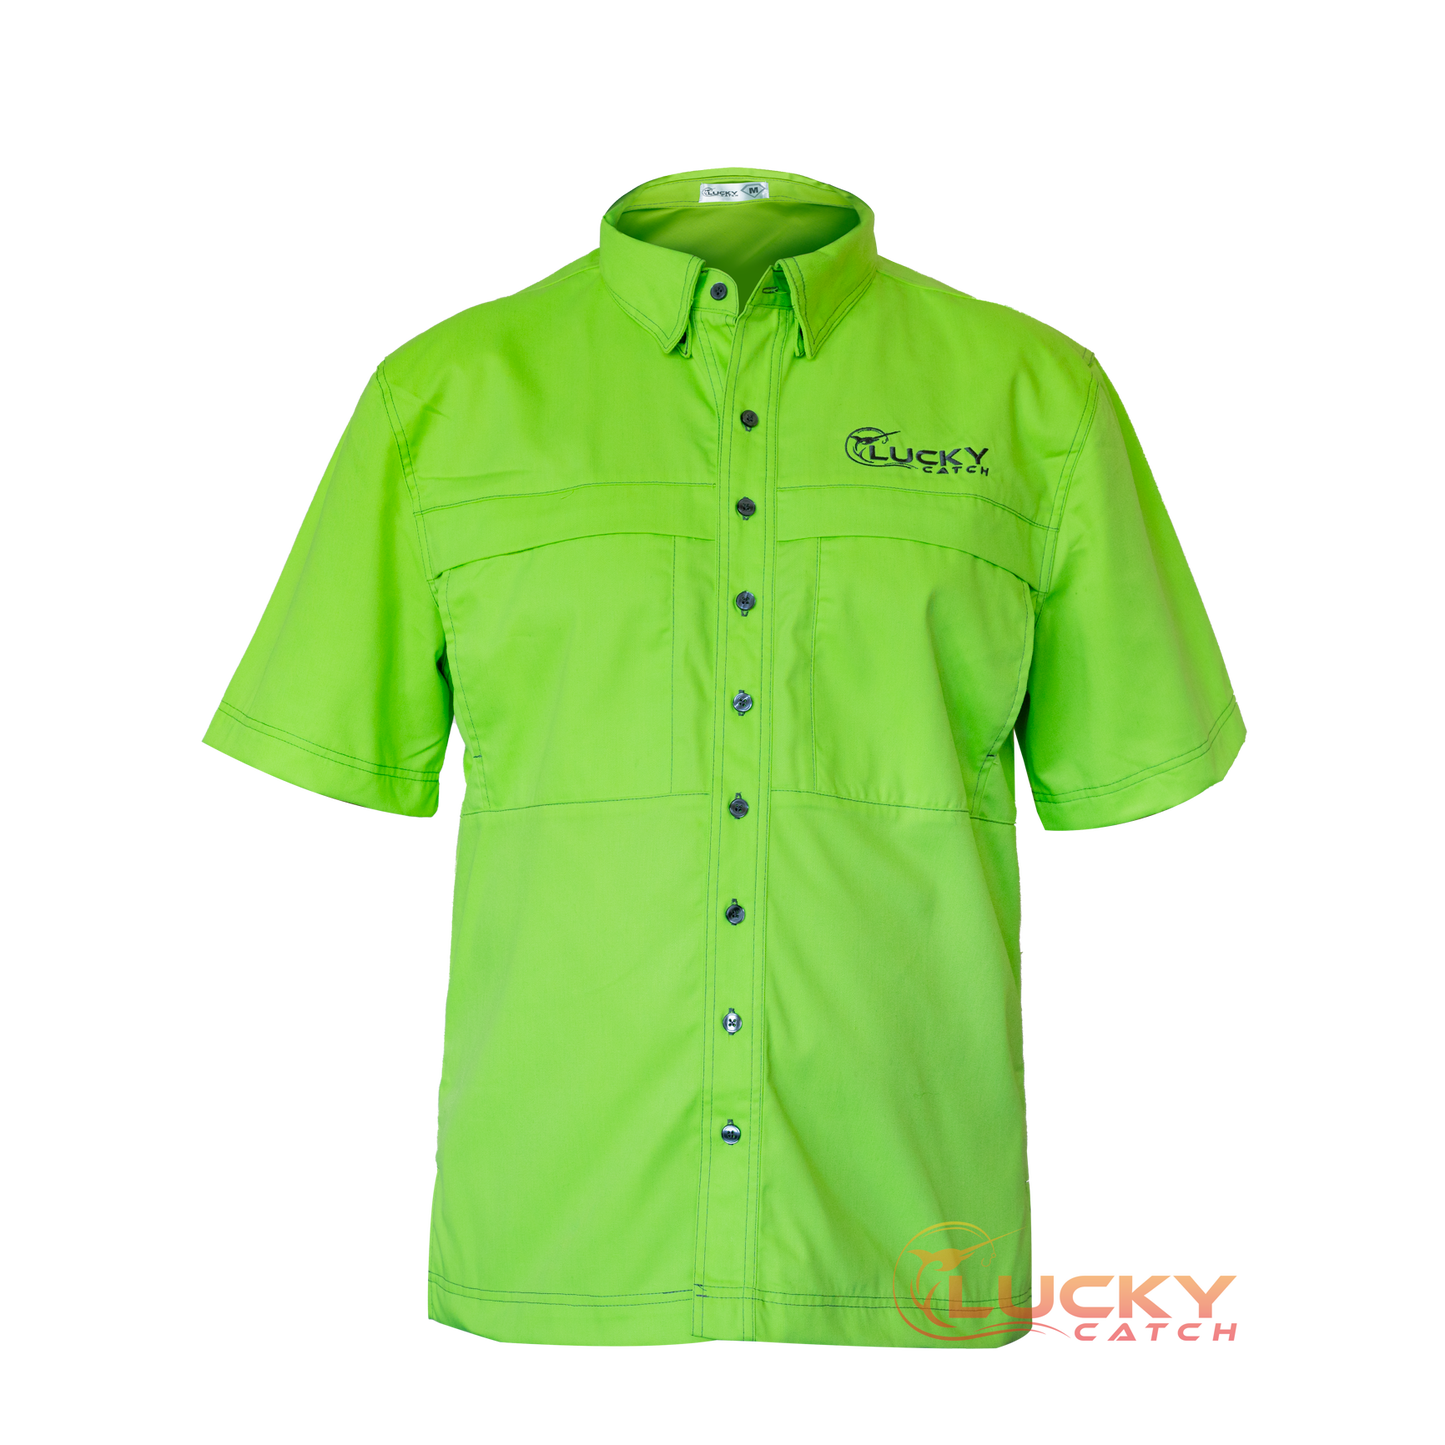 Lucky Catch-Neon Green with Gray Stitch, Precision Fishing Shirt